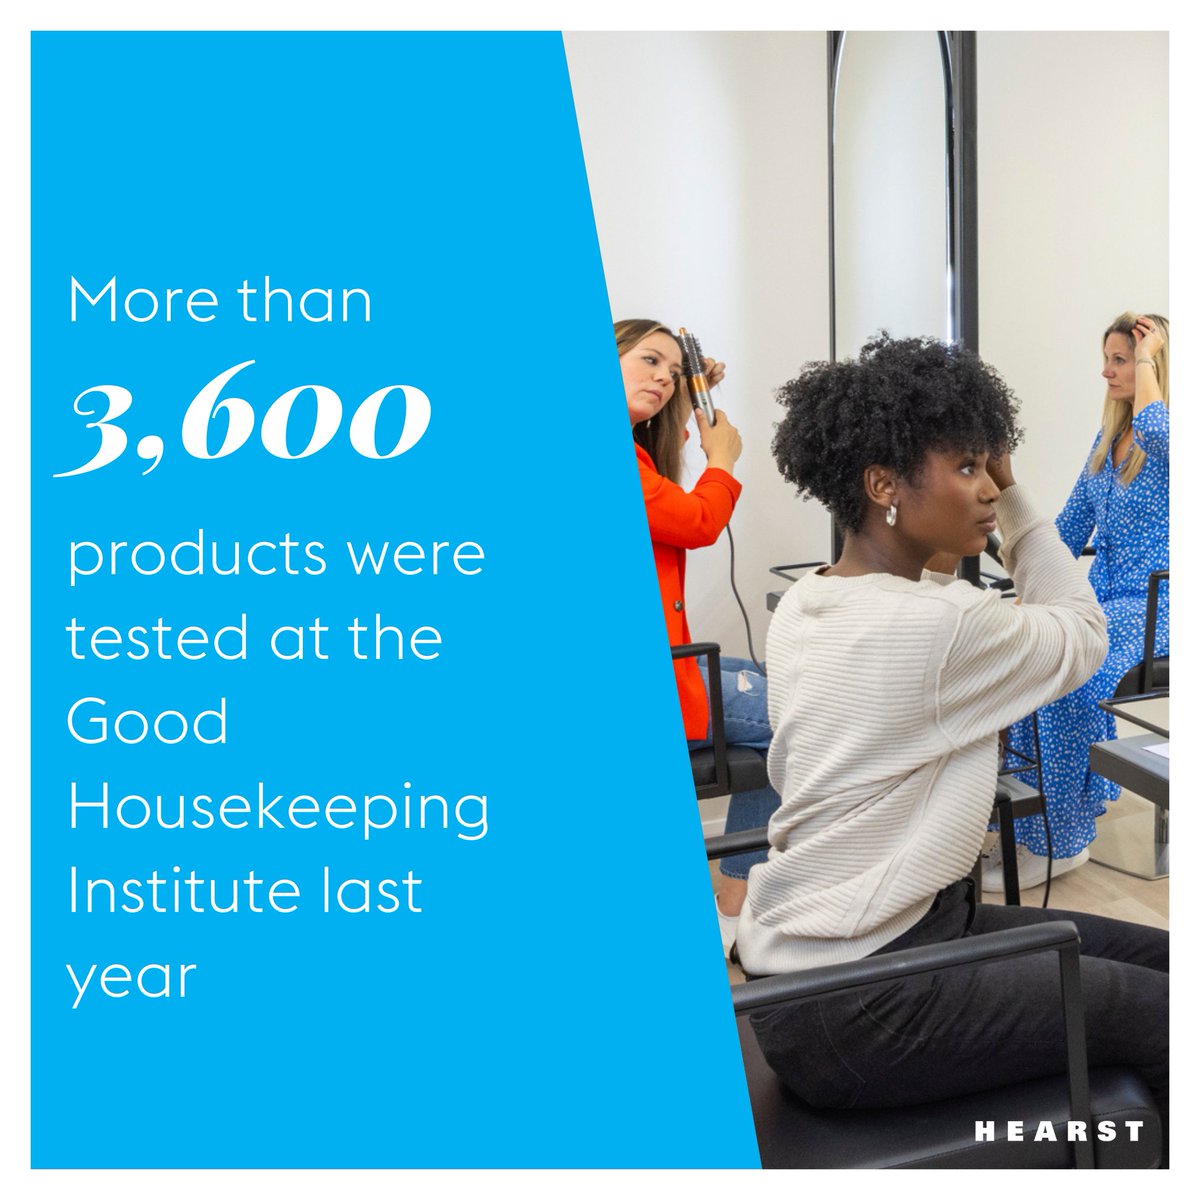 As part of its 100th anniversary celebrations, the Good Housekeeping Institute opened its doors this week for a behind-the-scenes look at its state-of-the-art testing facility. See the key takeaways in @FIPPWorld's piece about the GHI Open Day here 👇 bit.ly/3SY1yv0